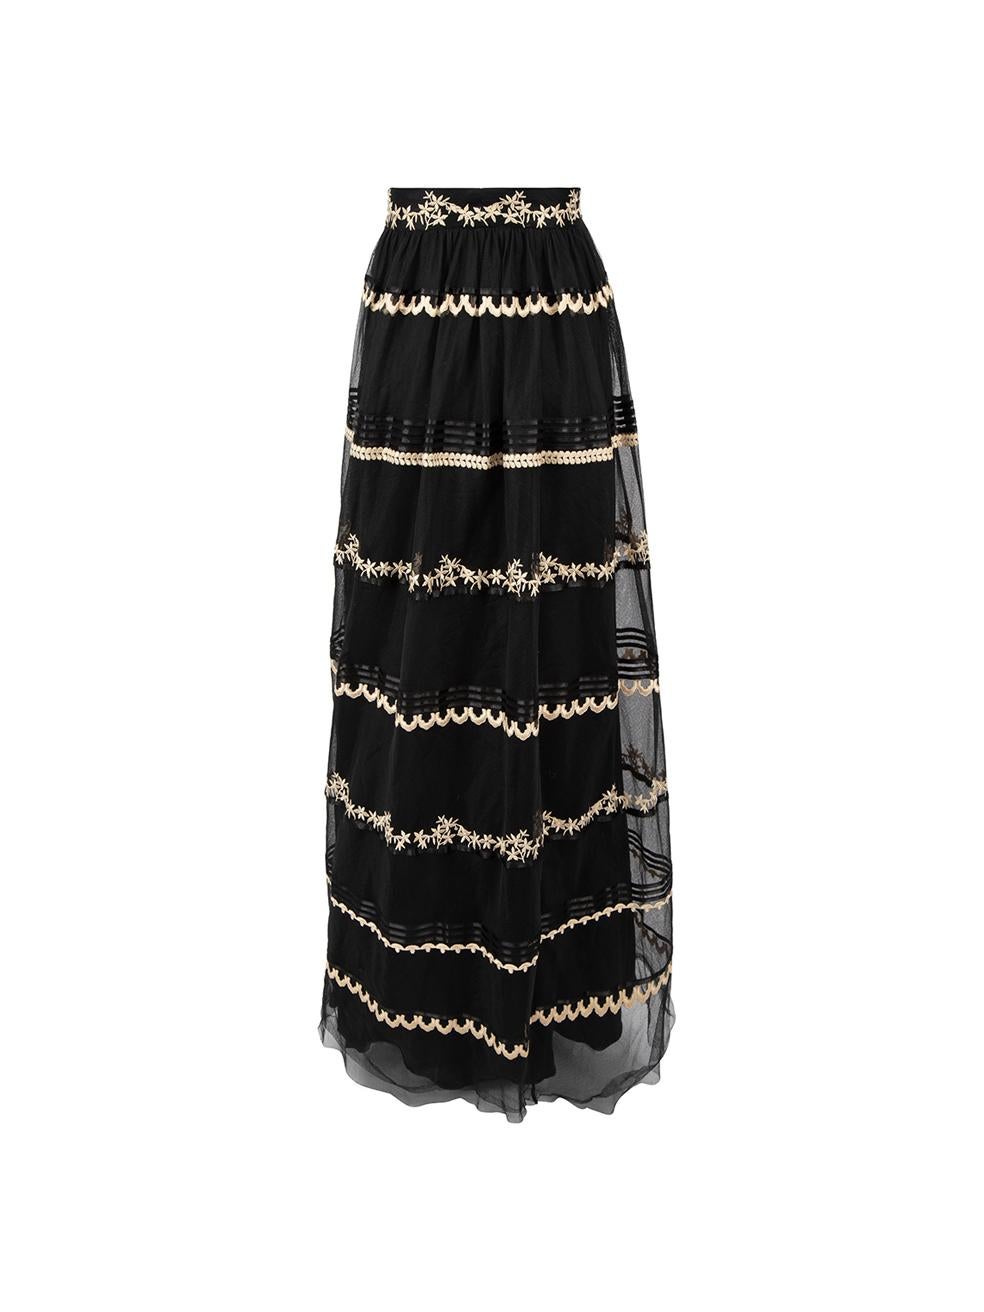 Women's Temperley London Black Embroidered Maxi Skirt Size XS